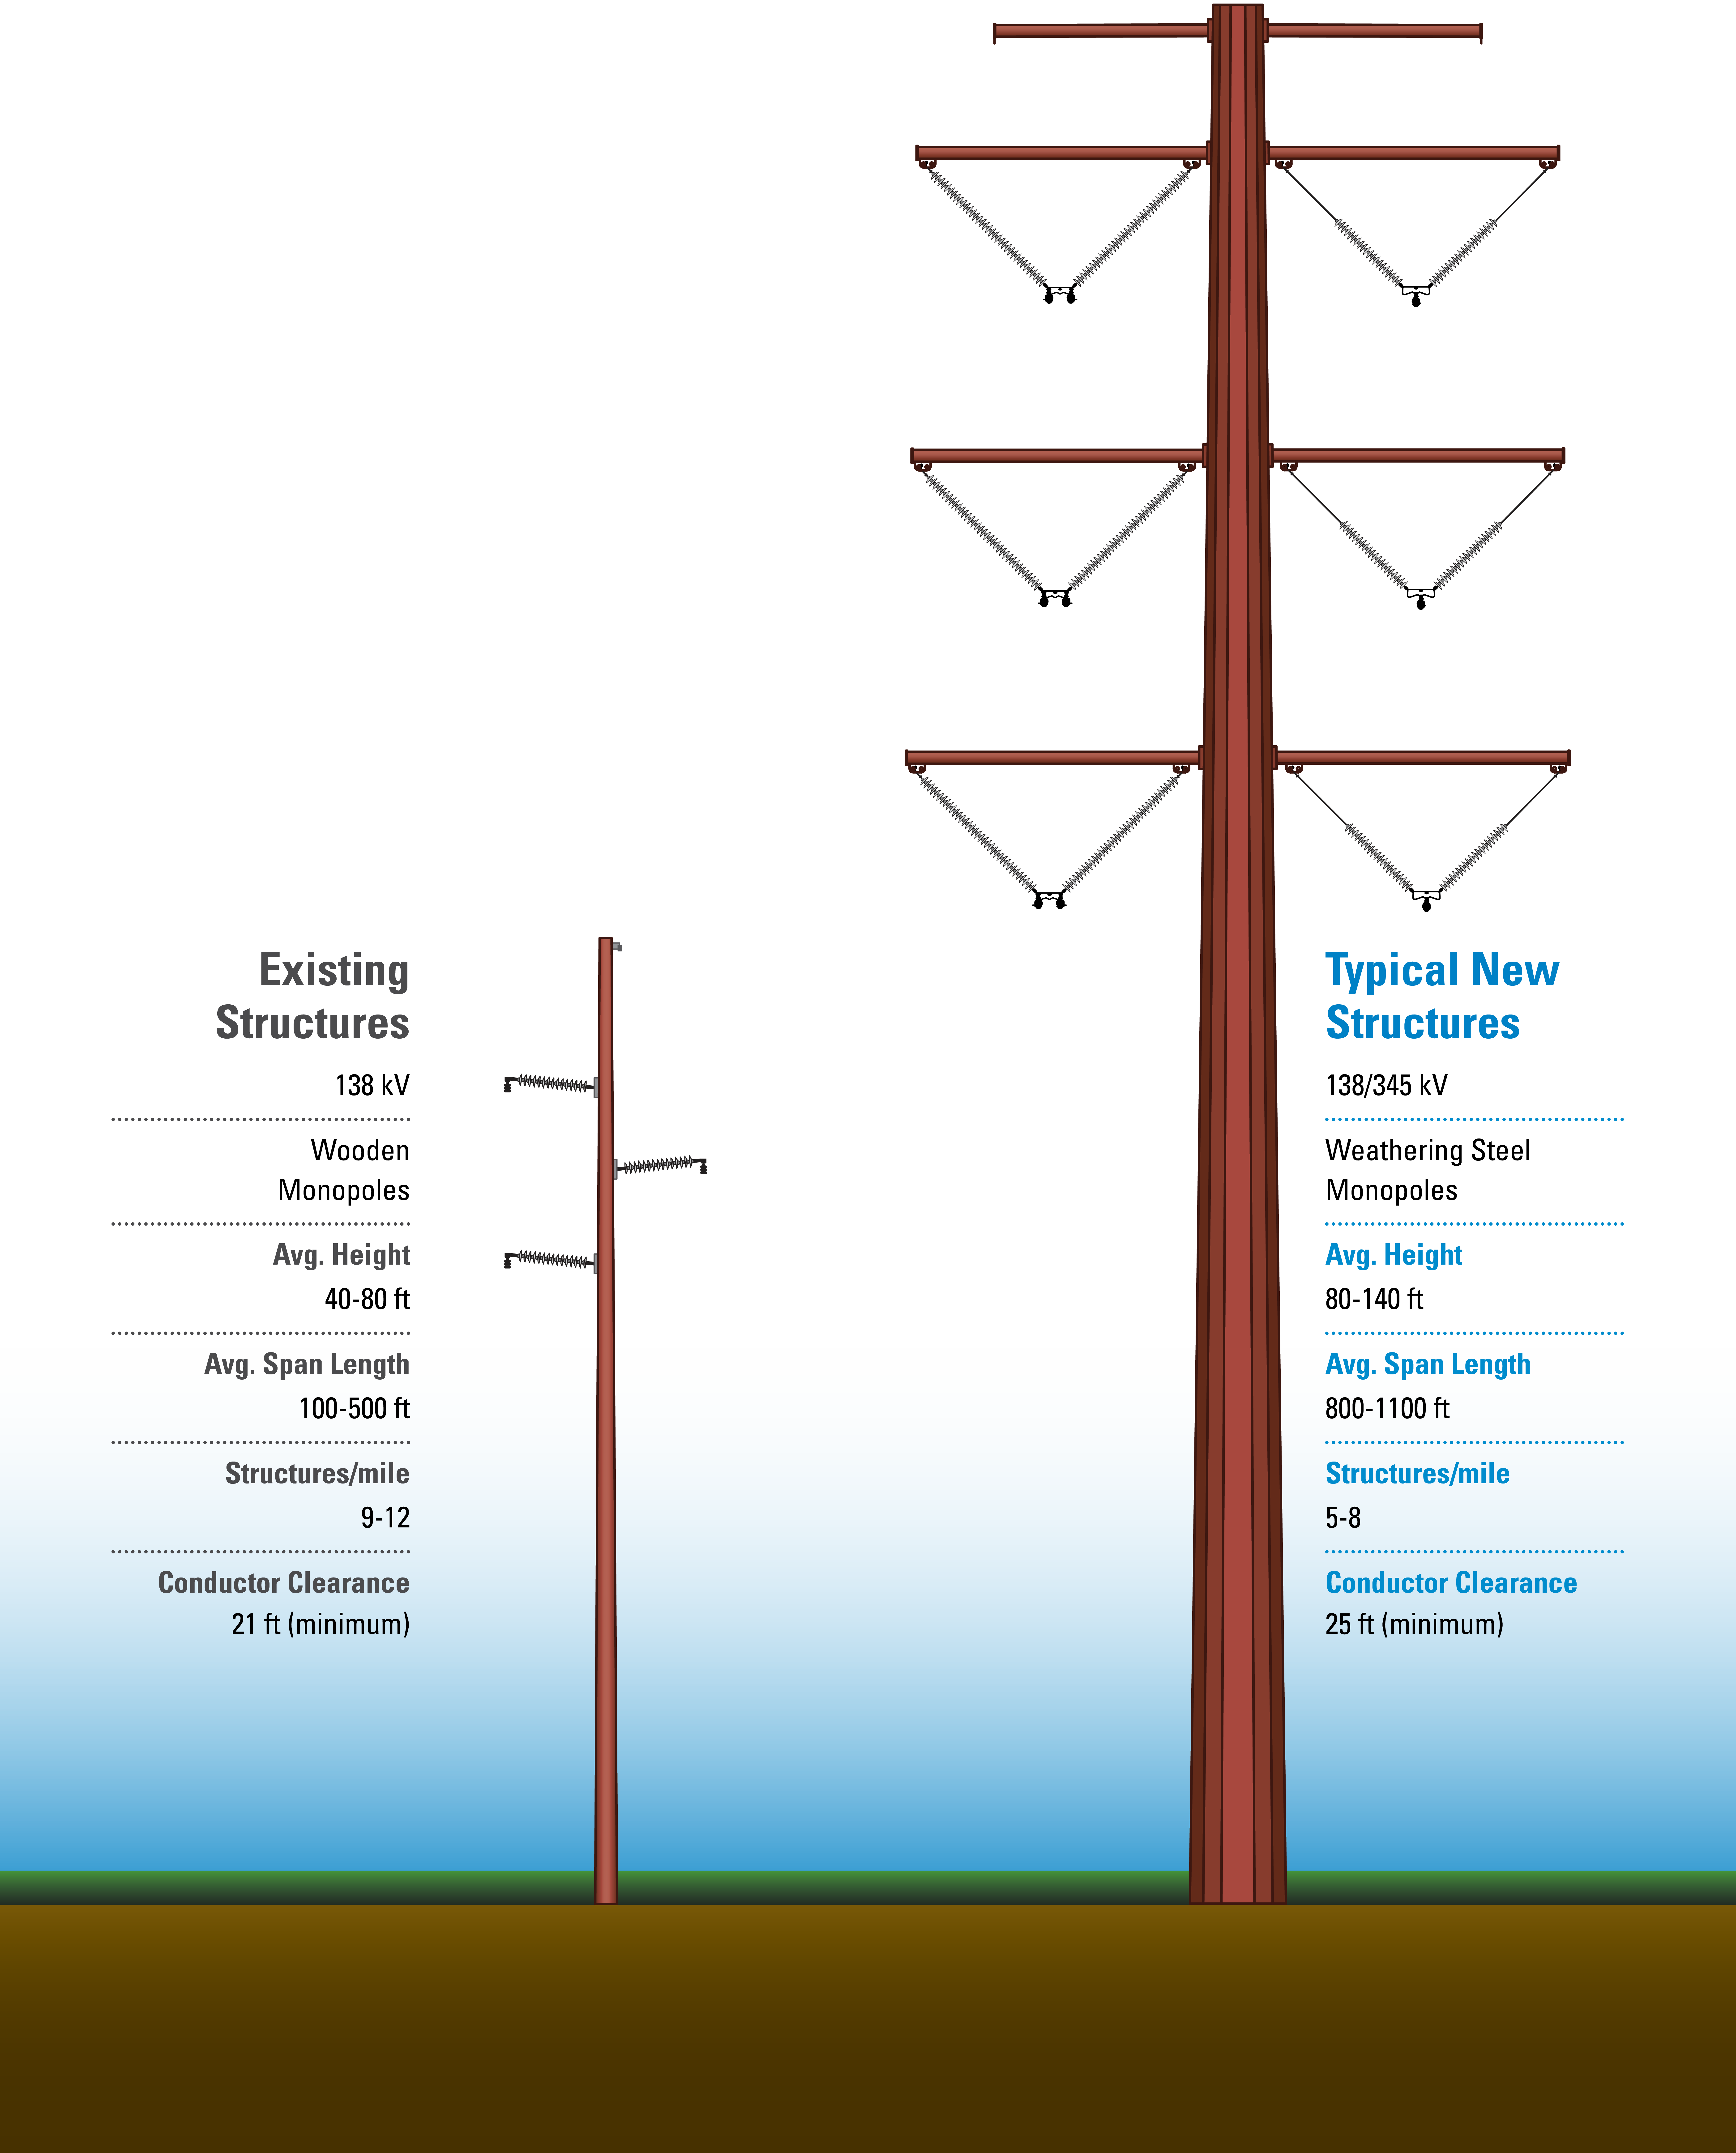 Two side by side structure graphics showing the existing structures and anticipated new structures for the county. Graphics are intended for information purposes only and are not to scale. New structure designs, including number of arms and type of foundation may vary depending on final route, soil conditions, circuit design, and presence of distribution.
                                                  Graphic 1 showcases the existing 138 kV wooden monopole, with an average height of 40-85ft and average span length between 100-500ft. Structures per mile averages between 9-12 miles with a conductor clearance of 21ft minimum. 
                                                  
                                                  Graphic 2 shows the anticipated new structure as a 138/345 kV weathering steel monopole with an average height of 80-140ft and average span length between 800-1100 ft. Structures per mile averages between 5-8 miles with a conductor clearance of 25ft minimum.